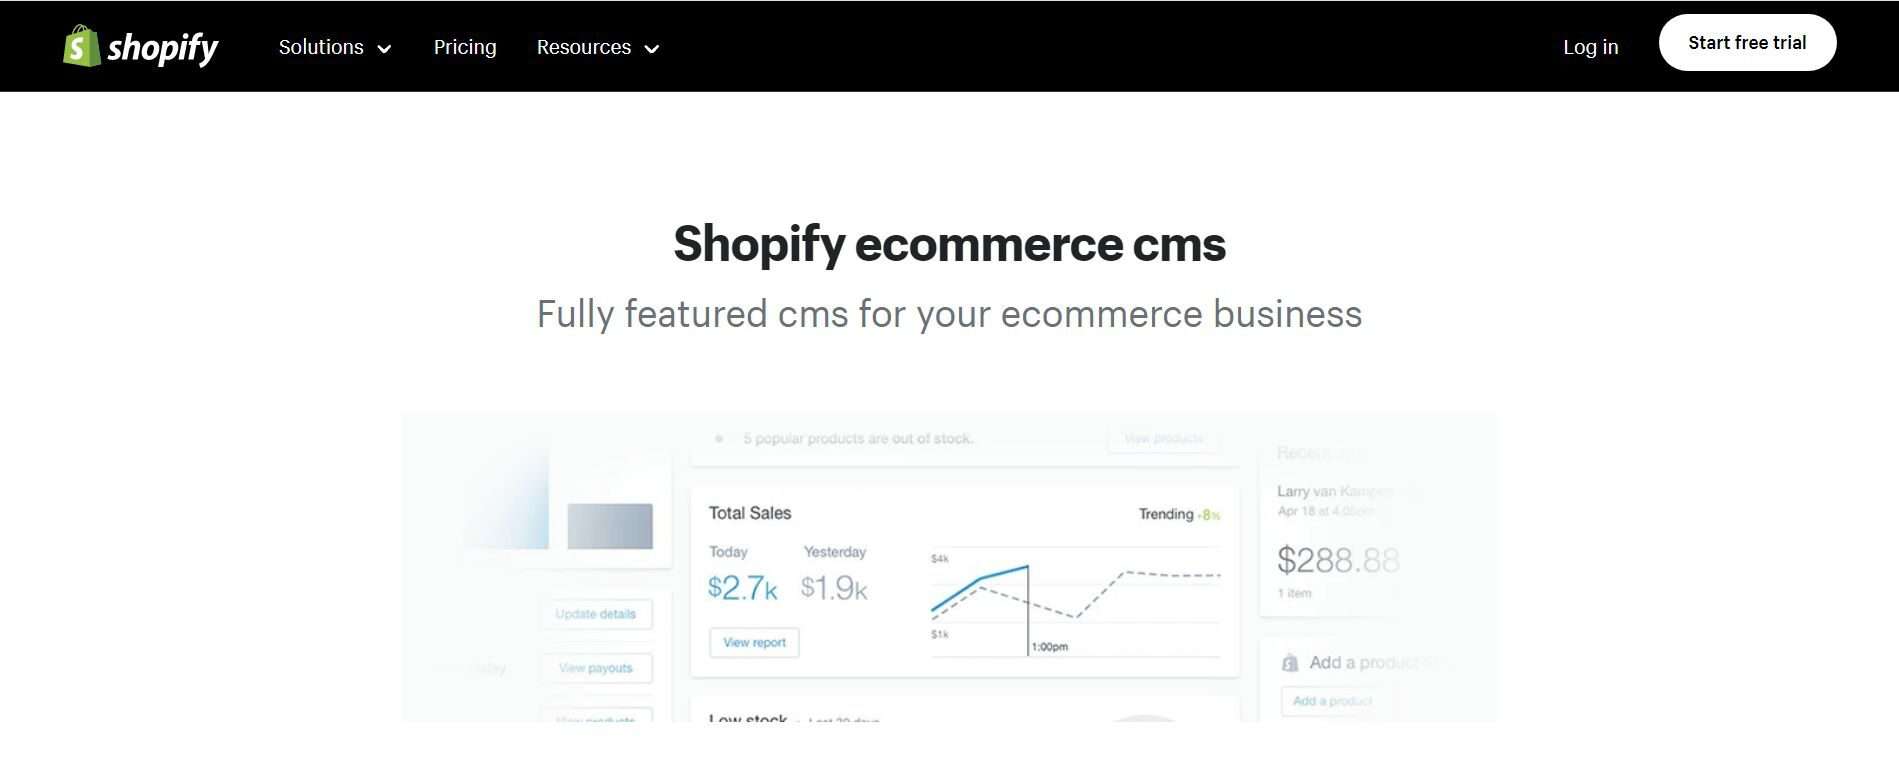 Shopify eCommerce CMS software